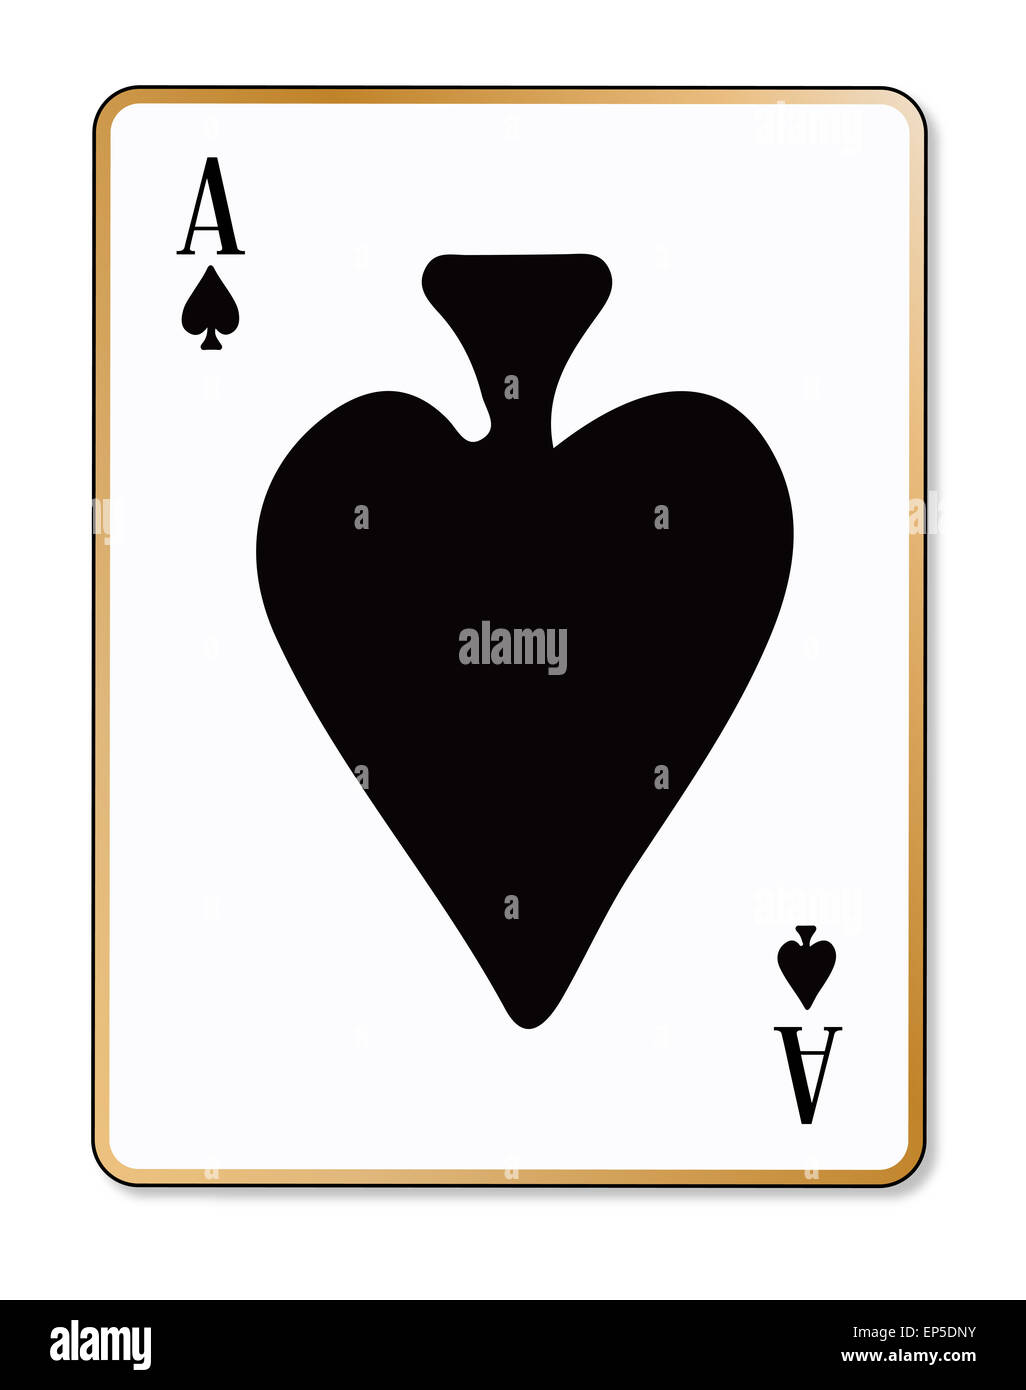 The playing card the Ace of spades over a white background Stock Photo